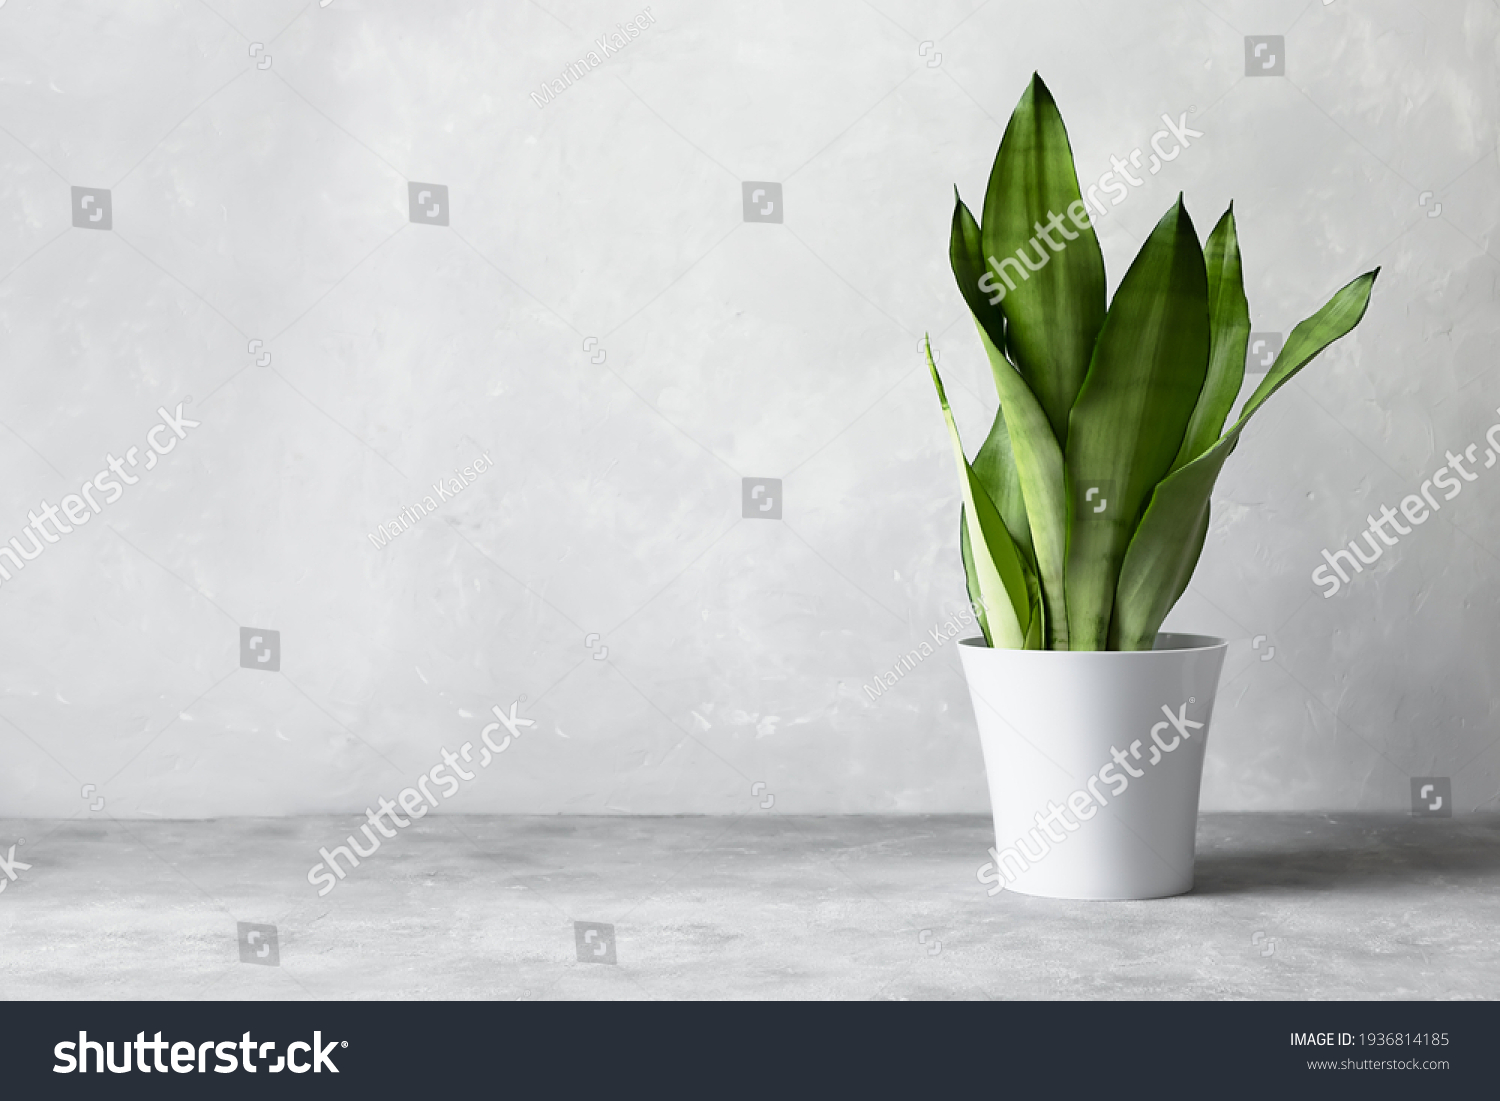 Sansevieria plant in a modern flower pot on a gray background. Home plant Sansevieria trifa from the family of asparagus. The concept of minimalism. #1936814185